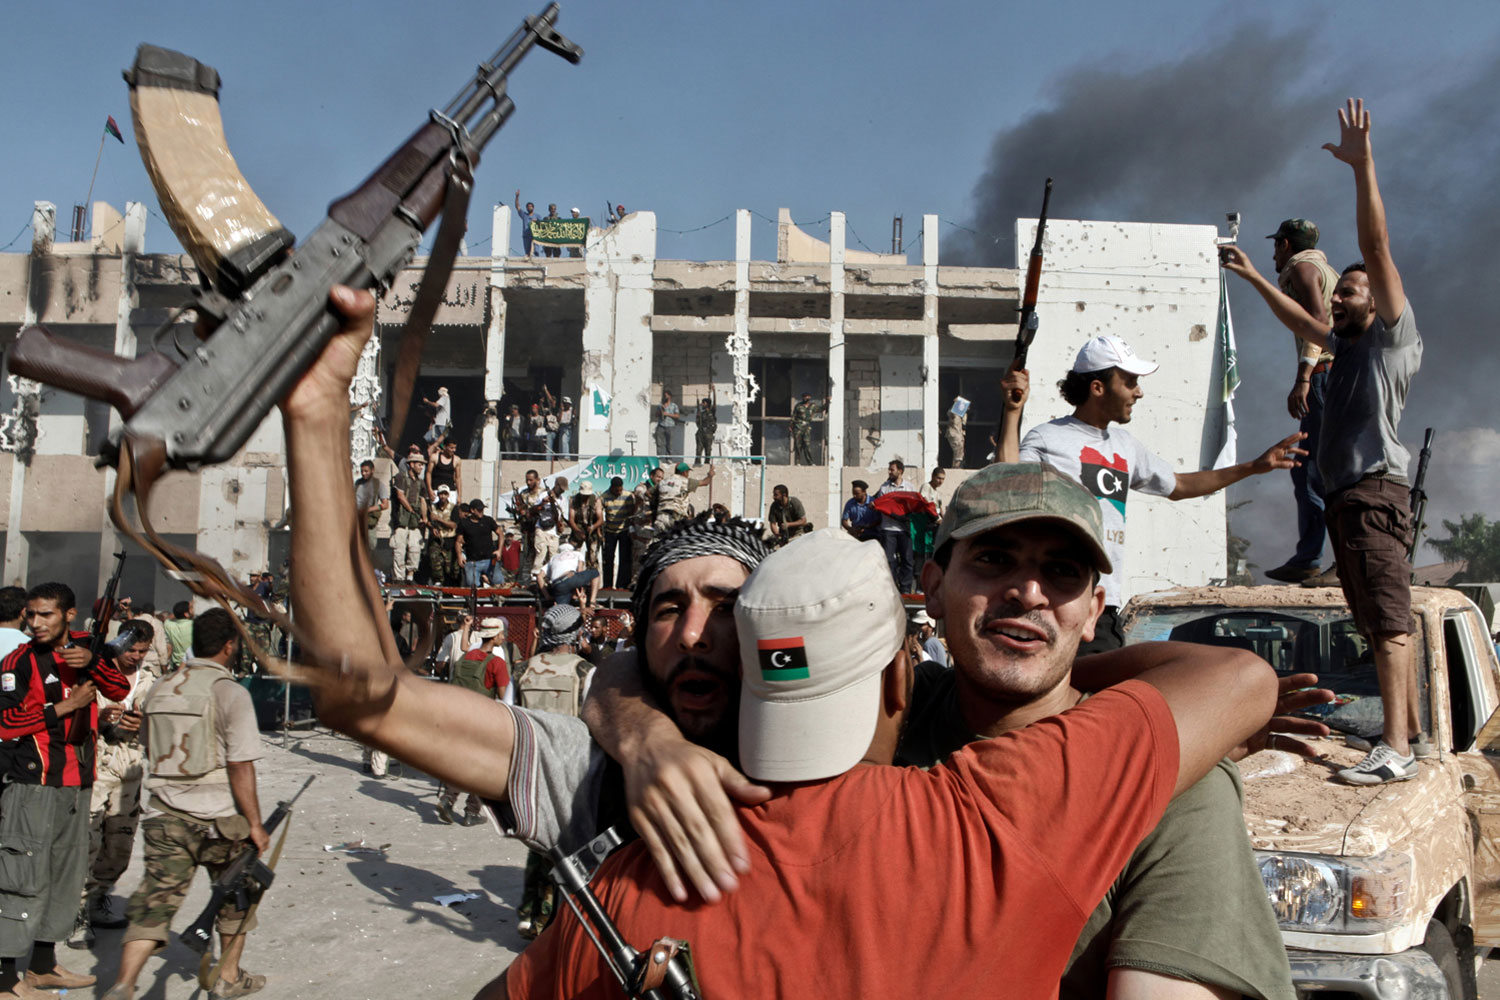 Aug. 23, 2011. After six months the rebels reached Tripoli and succeeded in overrunning Bab al-Aziziya, the compound of embattled leader Gaddafi.